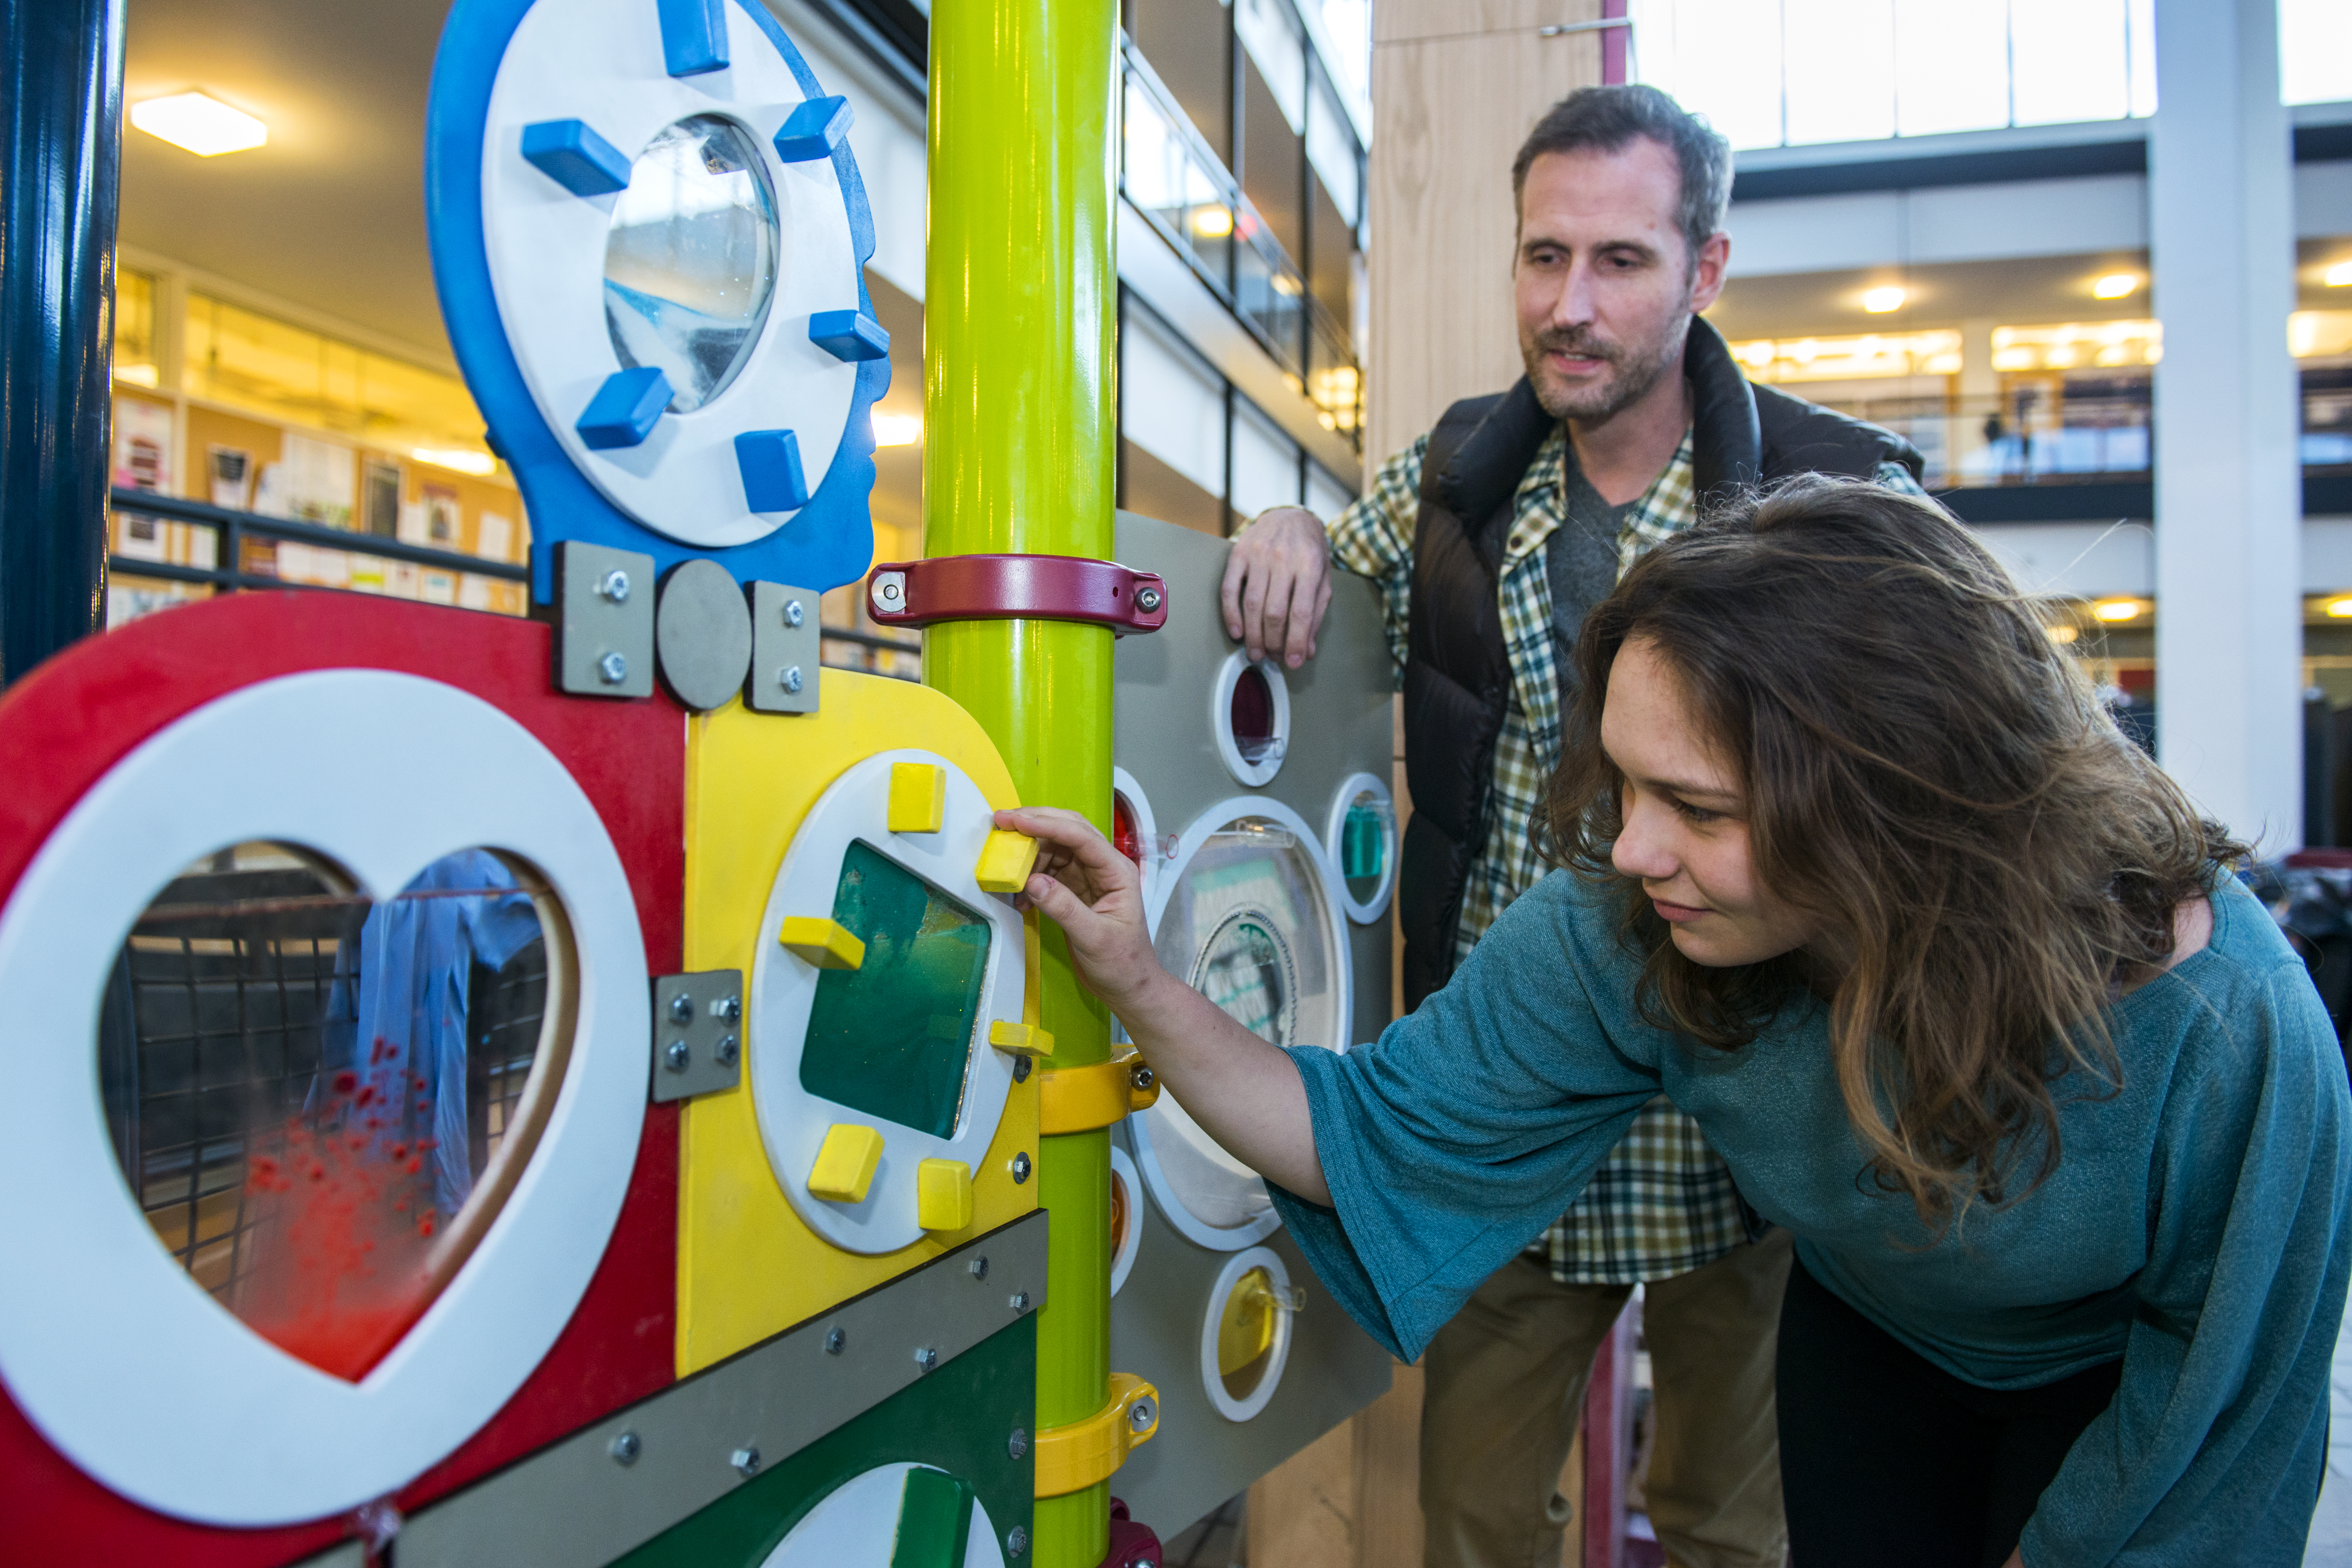 A woman playing with brightly colored gears on a wall while a man observes.